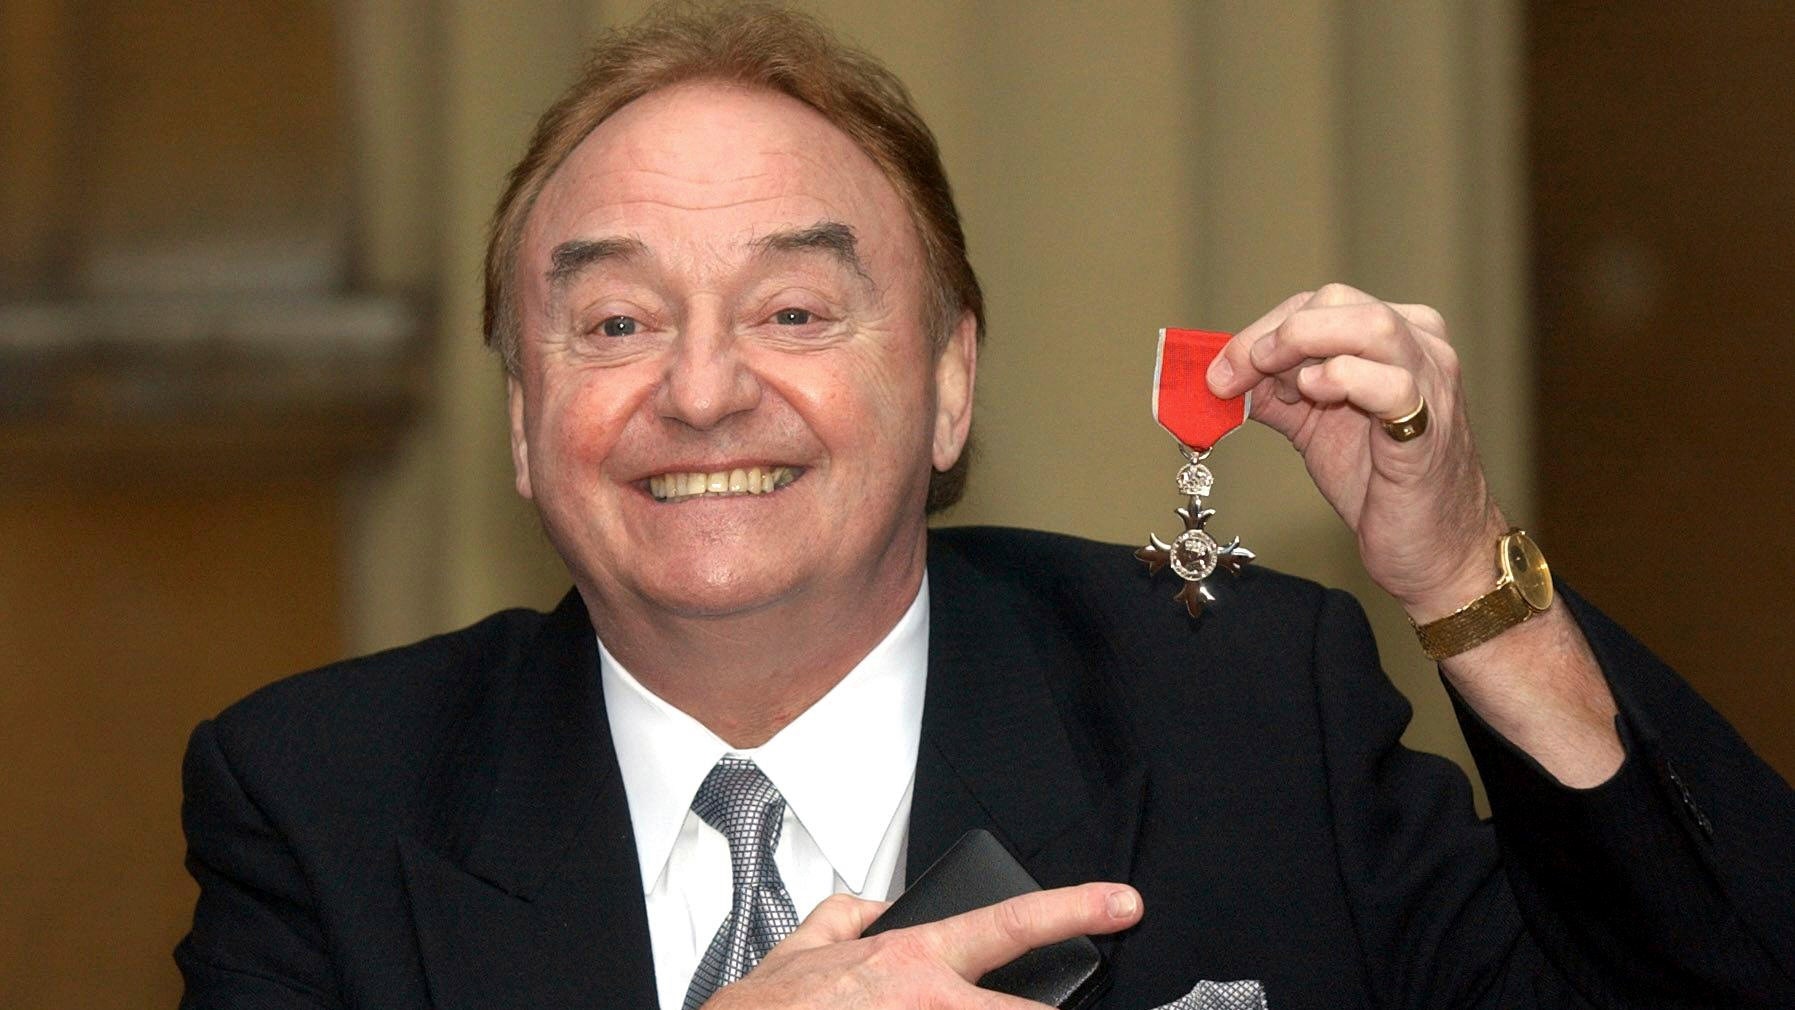 ‘You’re Never Walk Alone’ singer Gerry Marsden dies at 78